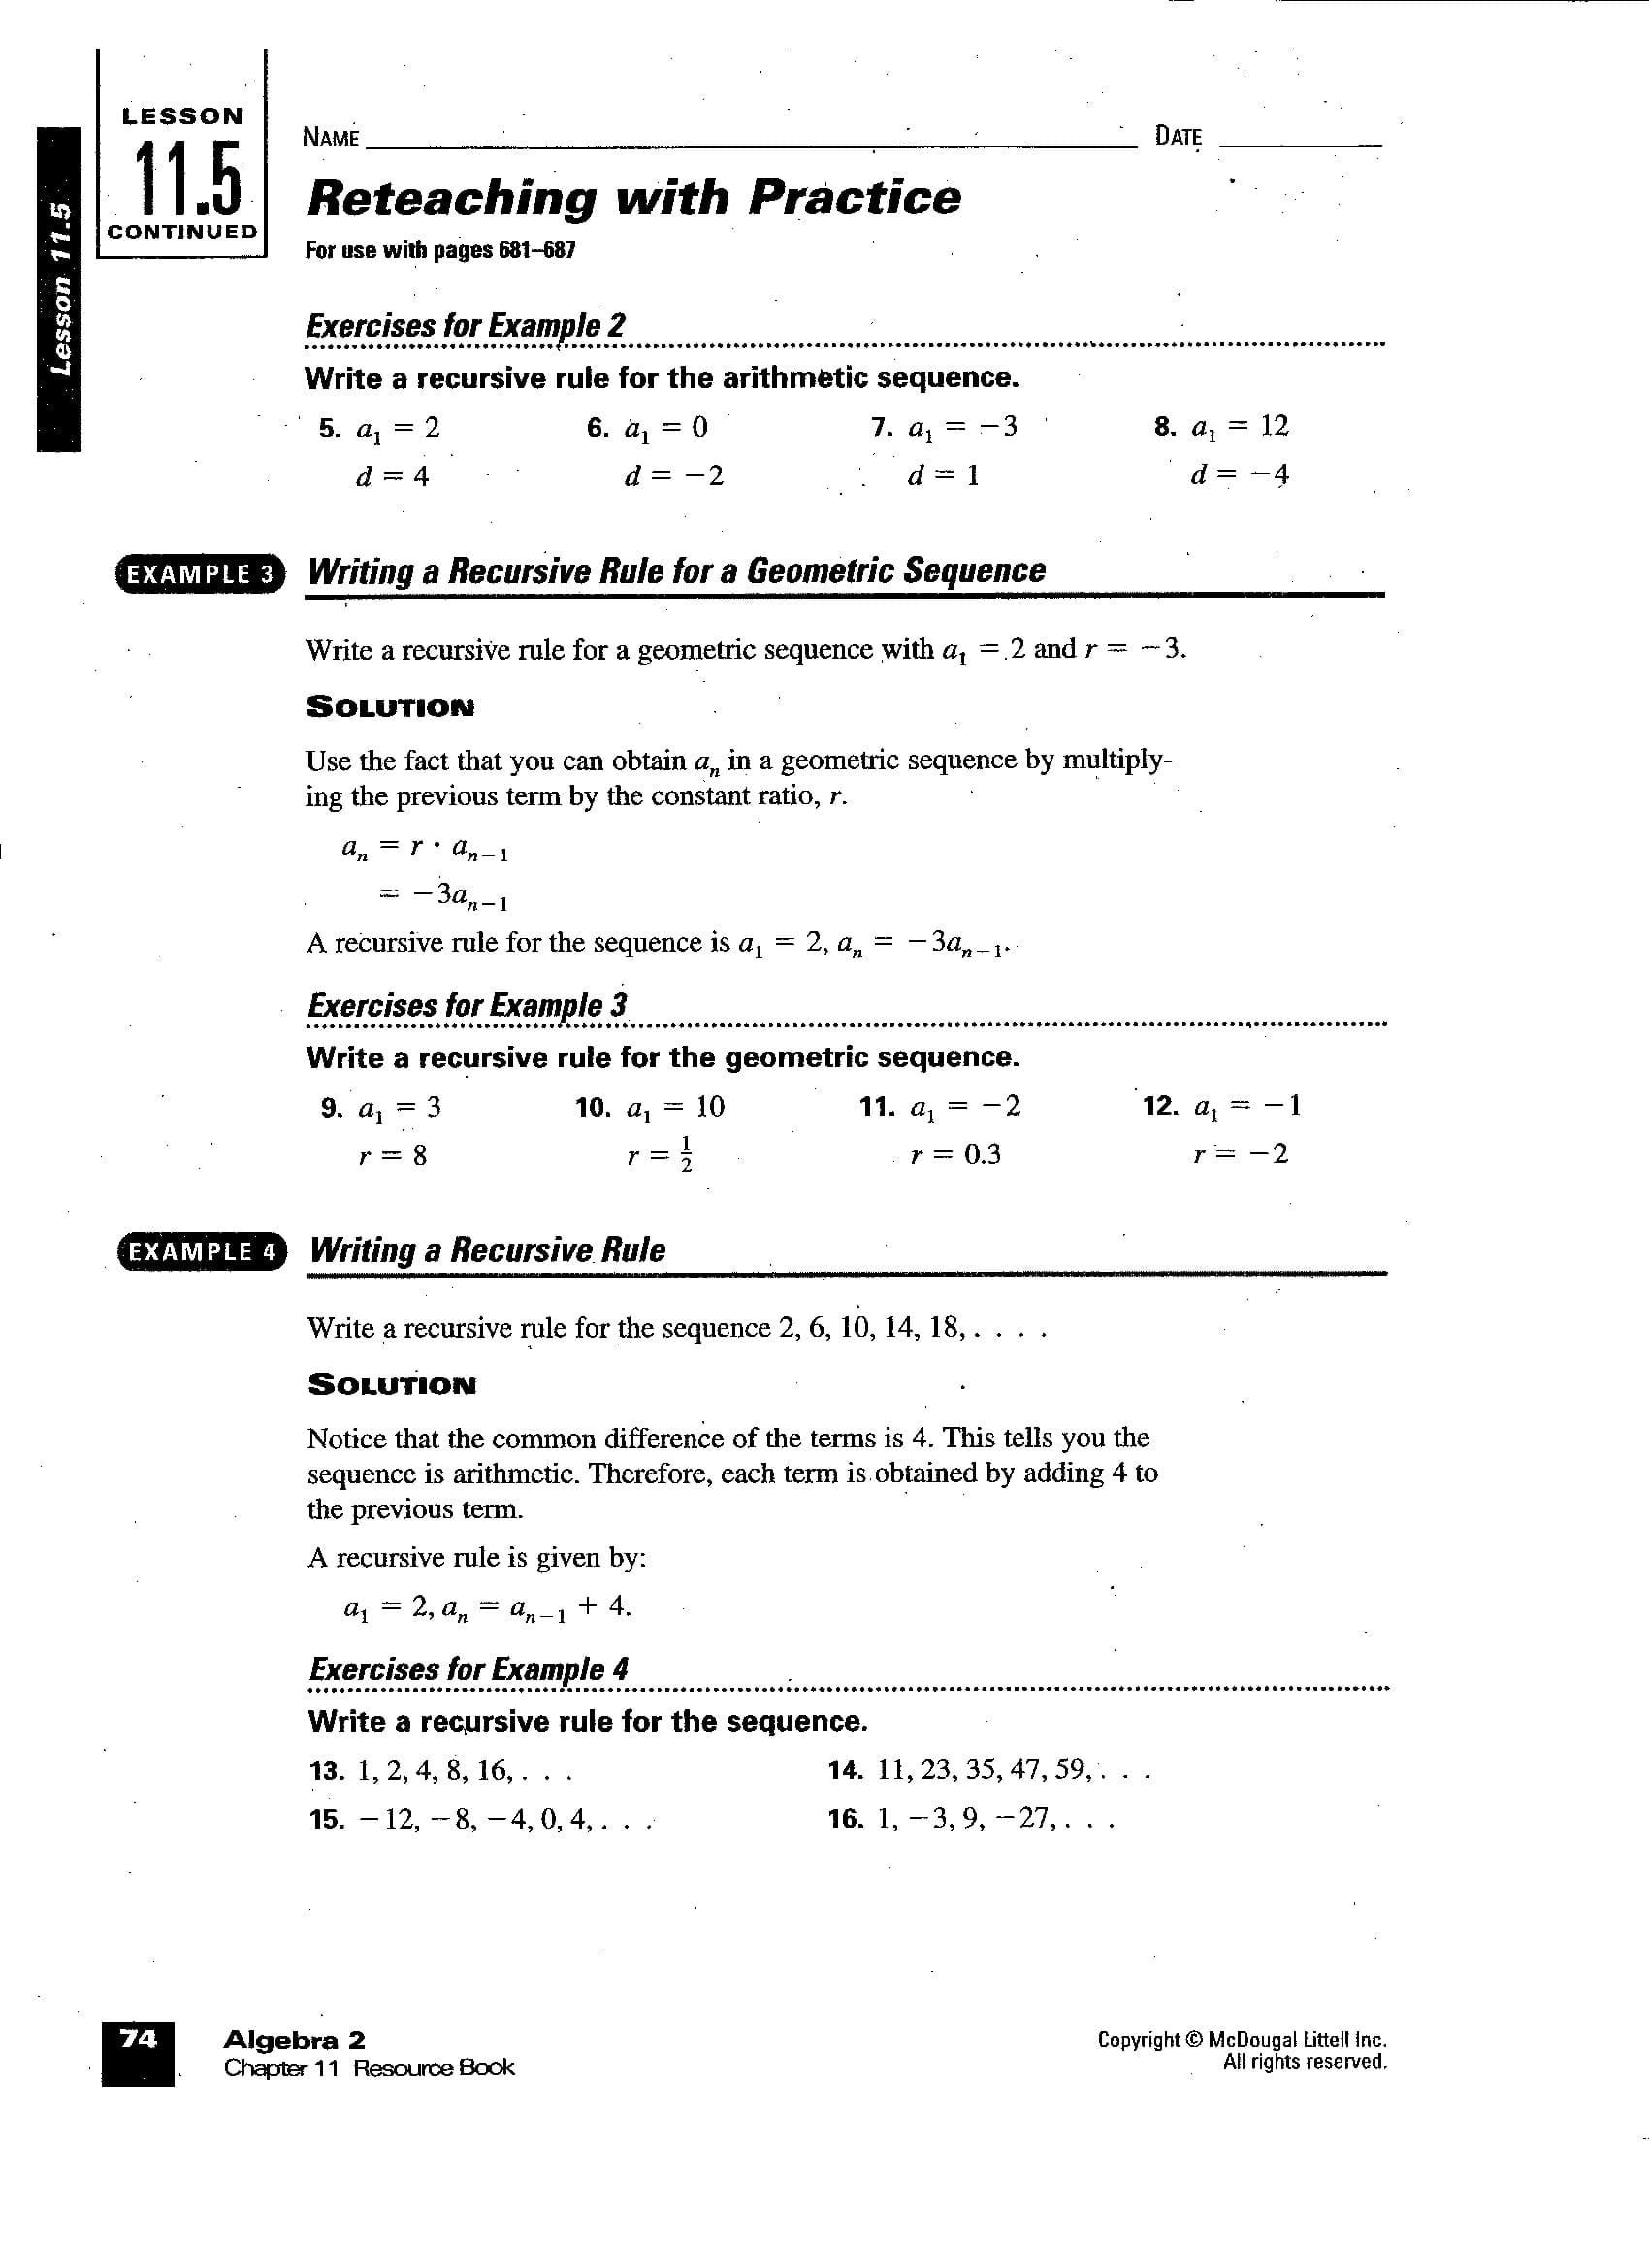 Arithmetic Sequence Worksheet With Answers Pdf Throughout Arithmetic And Geometric Sequences Worksheet Pdf